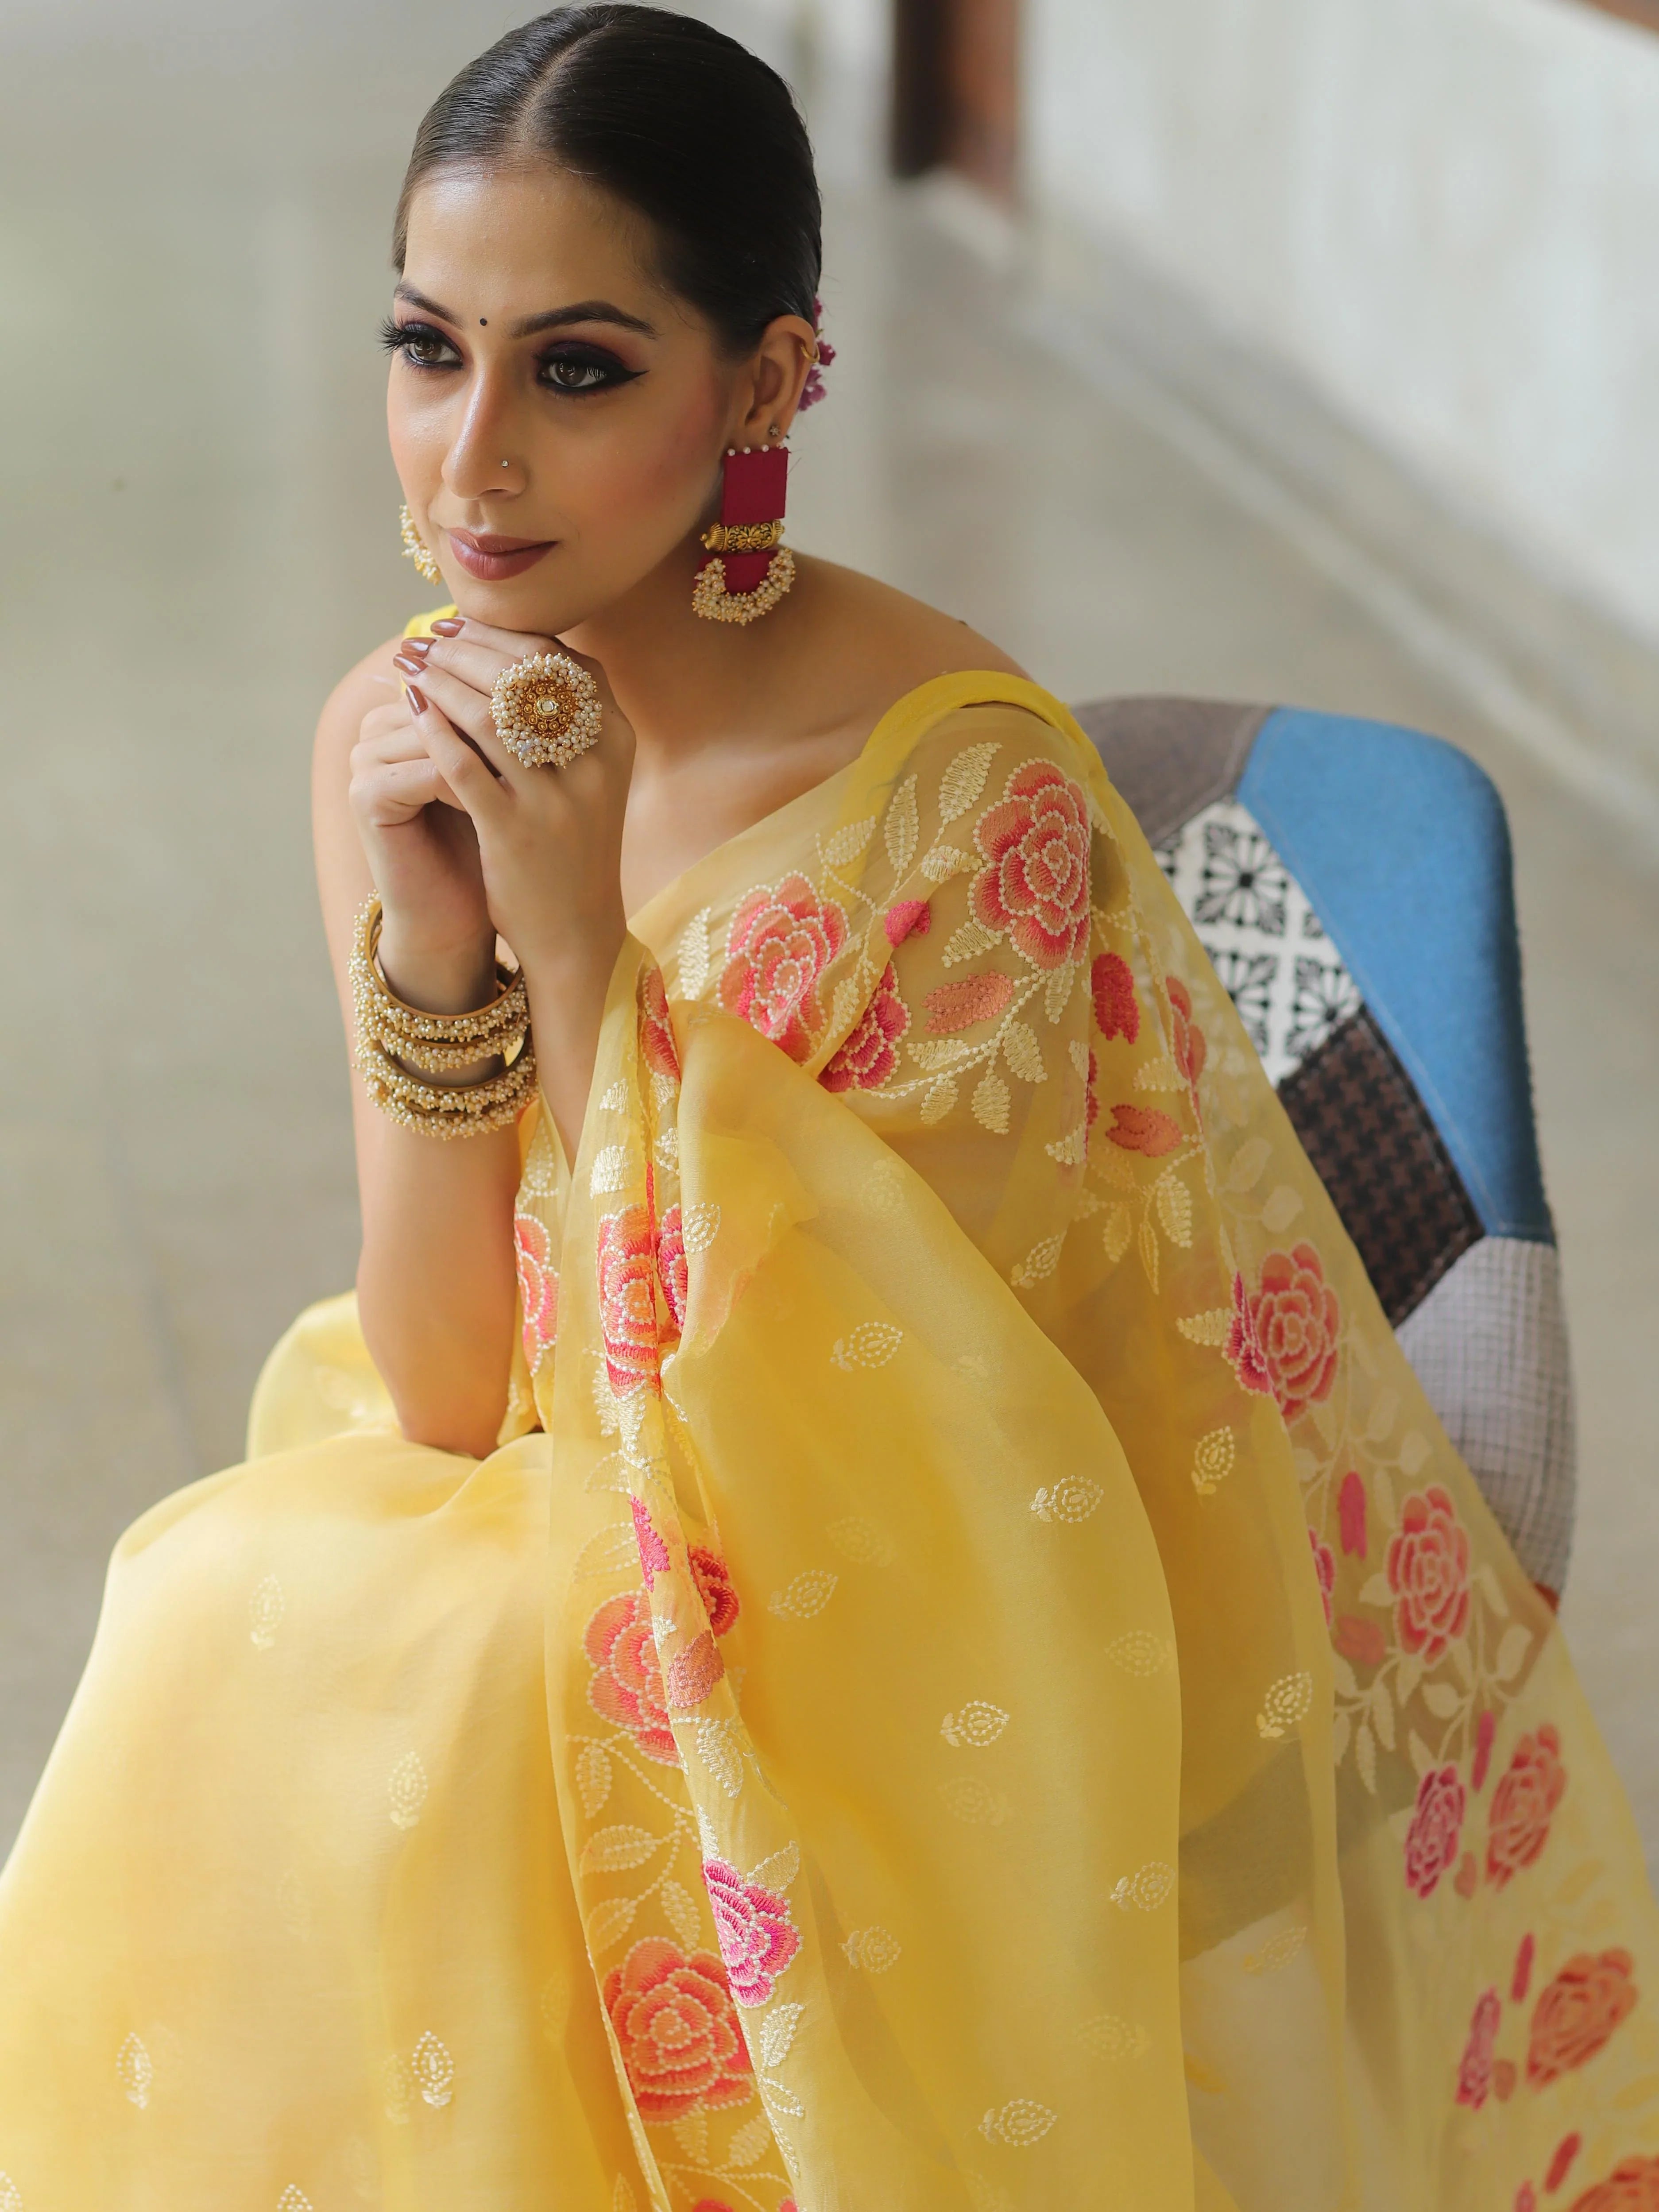 Yellow Organza Silk Saree with Resham Floral Embroidery Colorful Saree